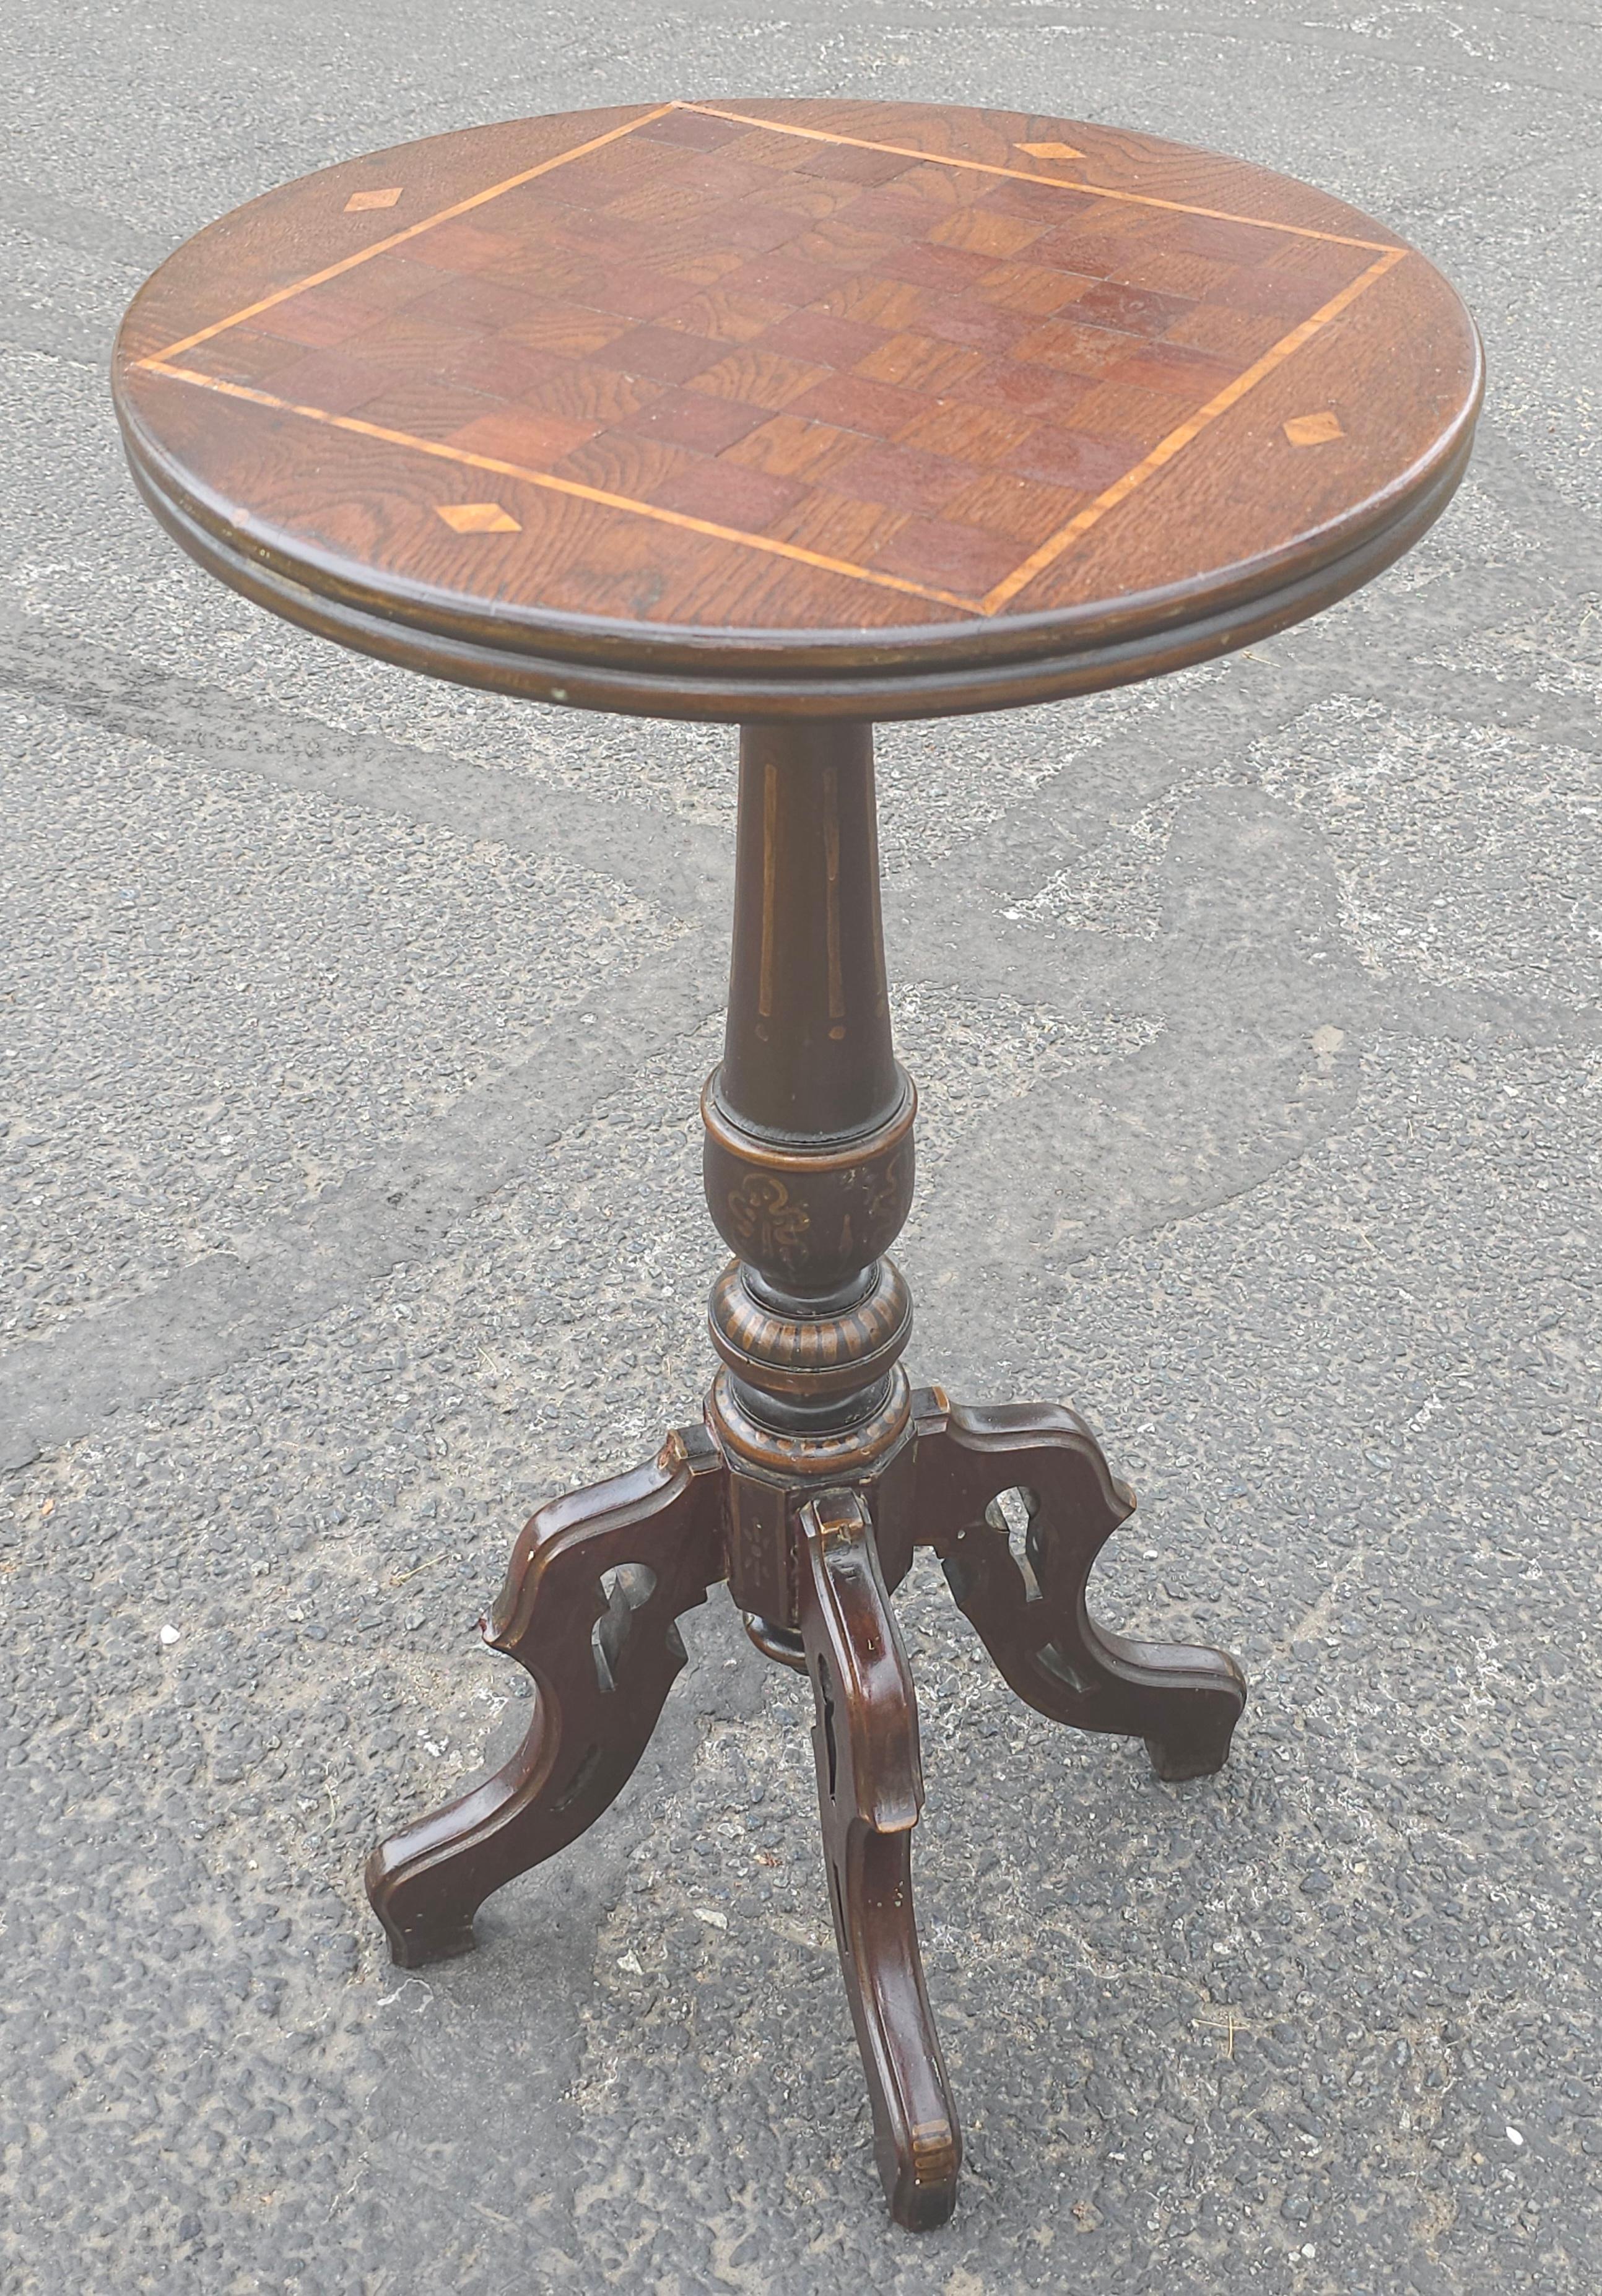 19th Century Victorian Oak & Mixed Wood Parquetry and Inlay Pedestal Game Table For Sale 6